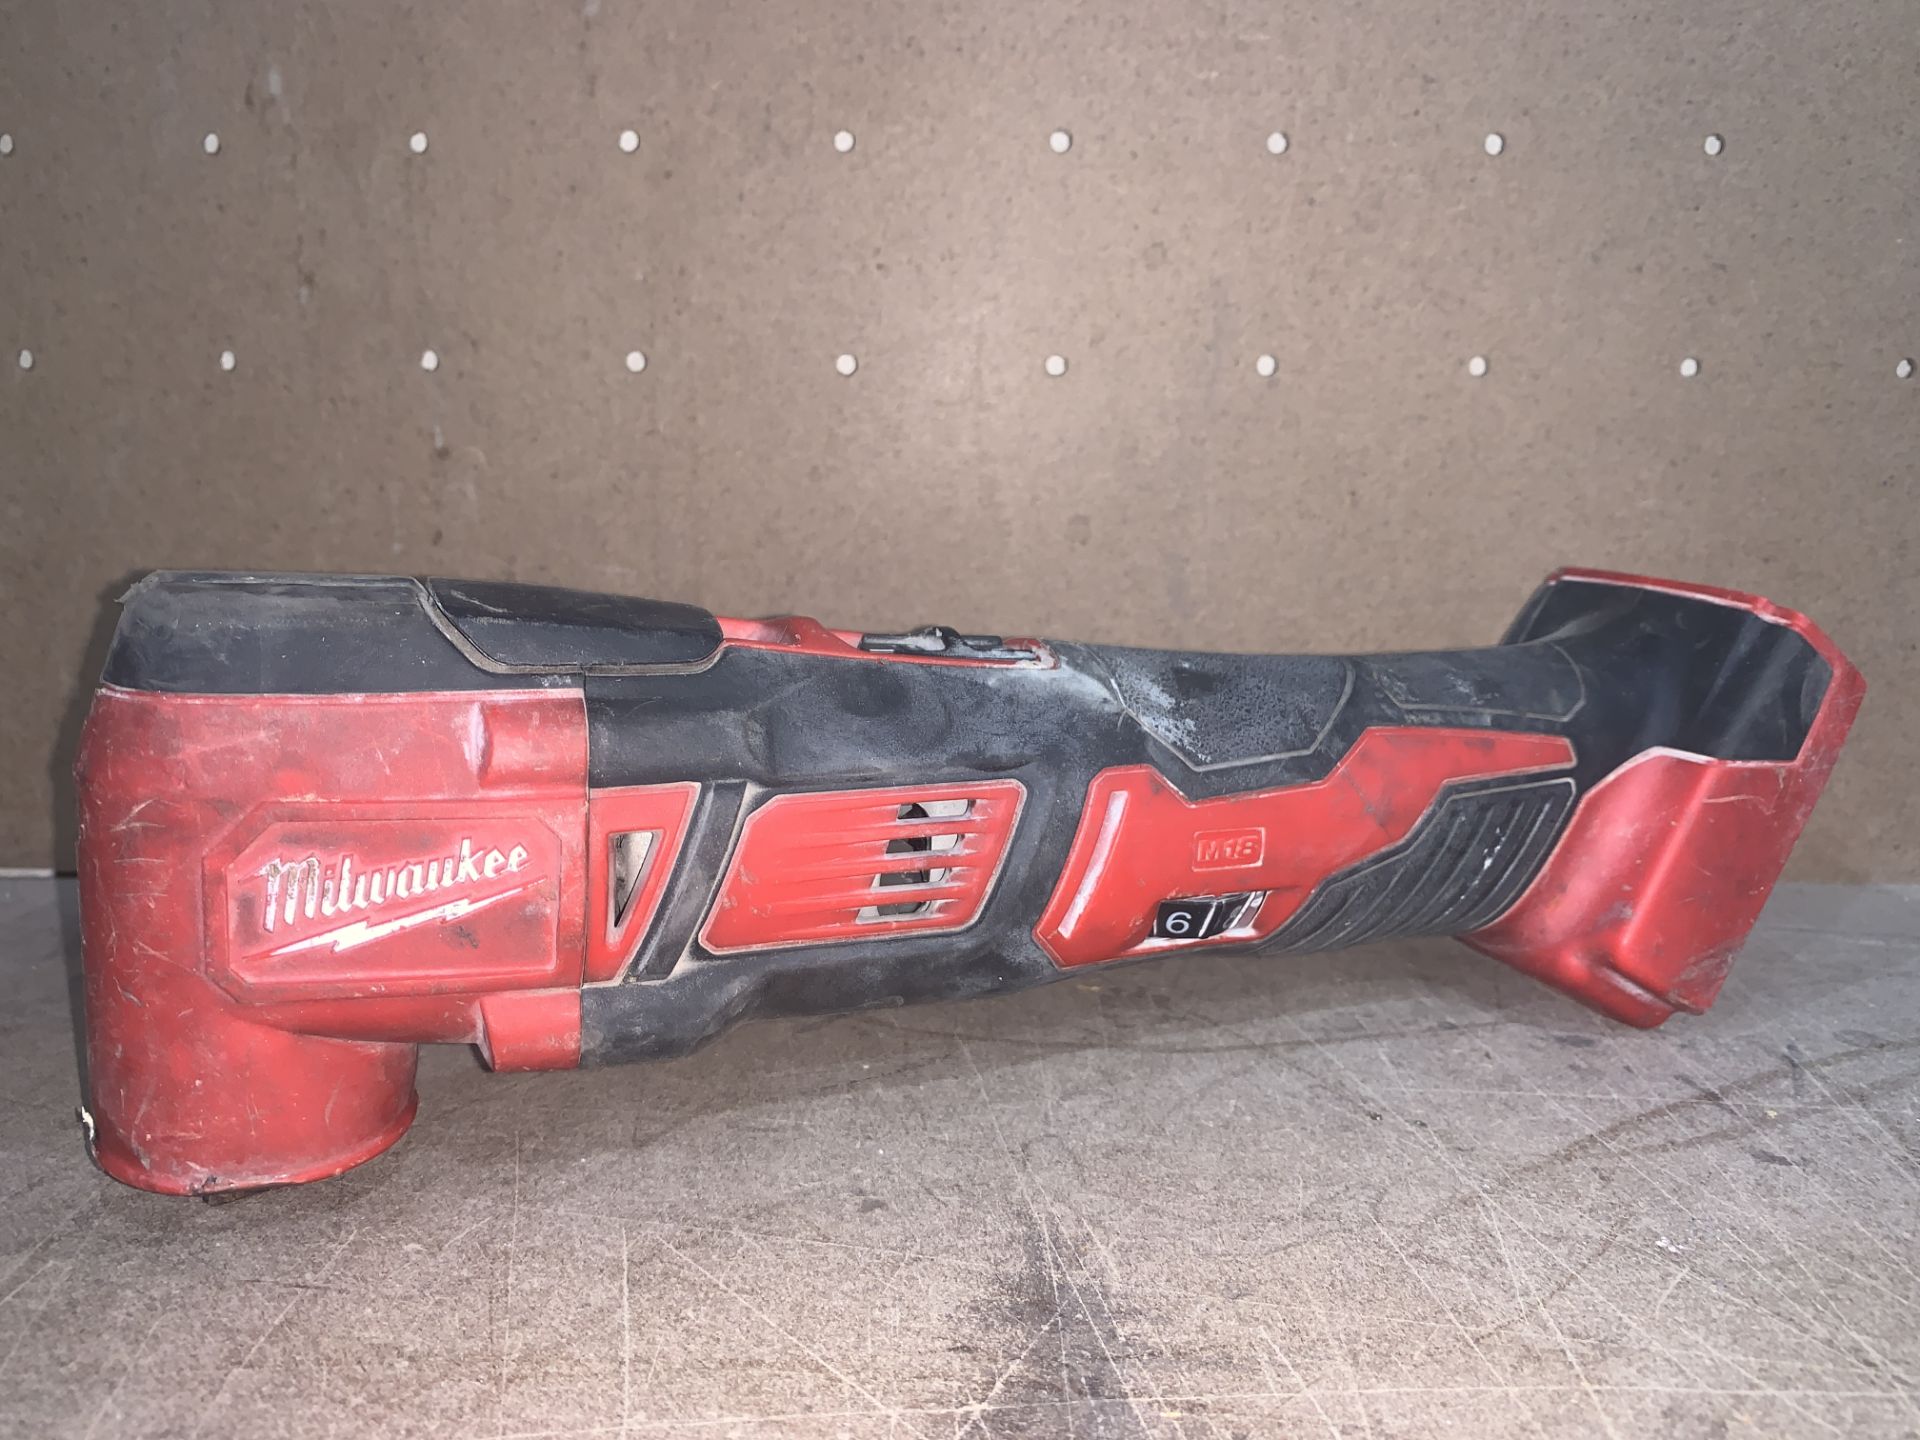 MILWAUKEE M18 BMT-0 18V LI-ION CORDLESS MULTI-TOOL UNCHECKED, UNTESTED)